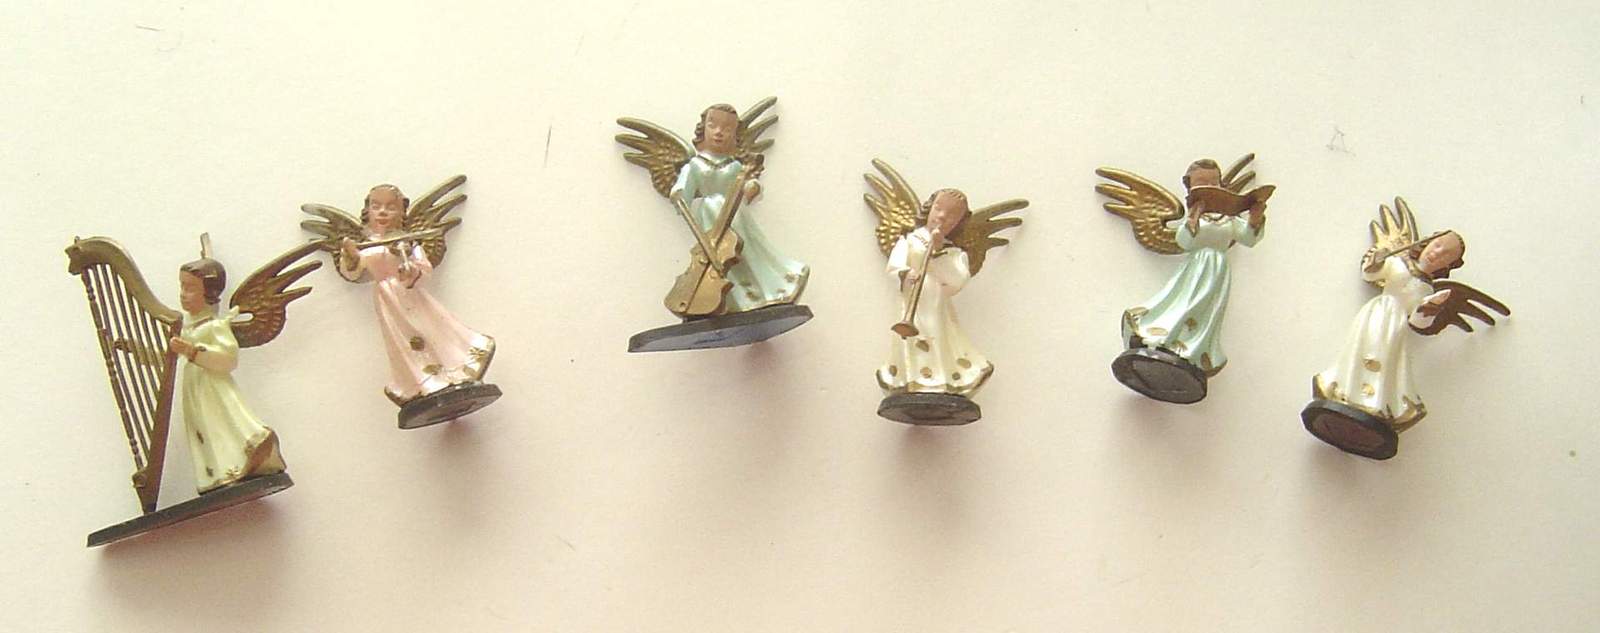 Miniature Angels Playing Music Celluloid Figurines  1960's Set of 6 - $19.99